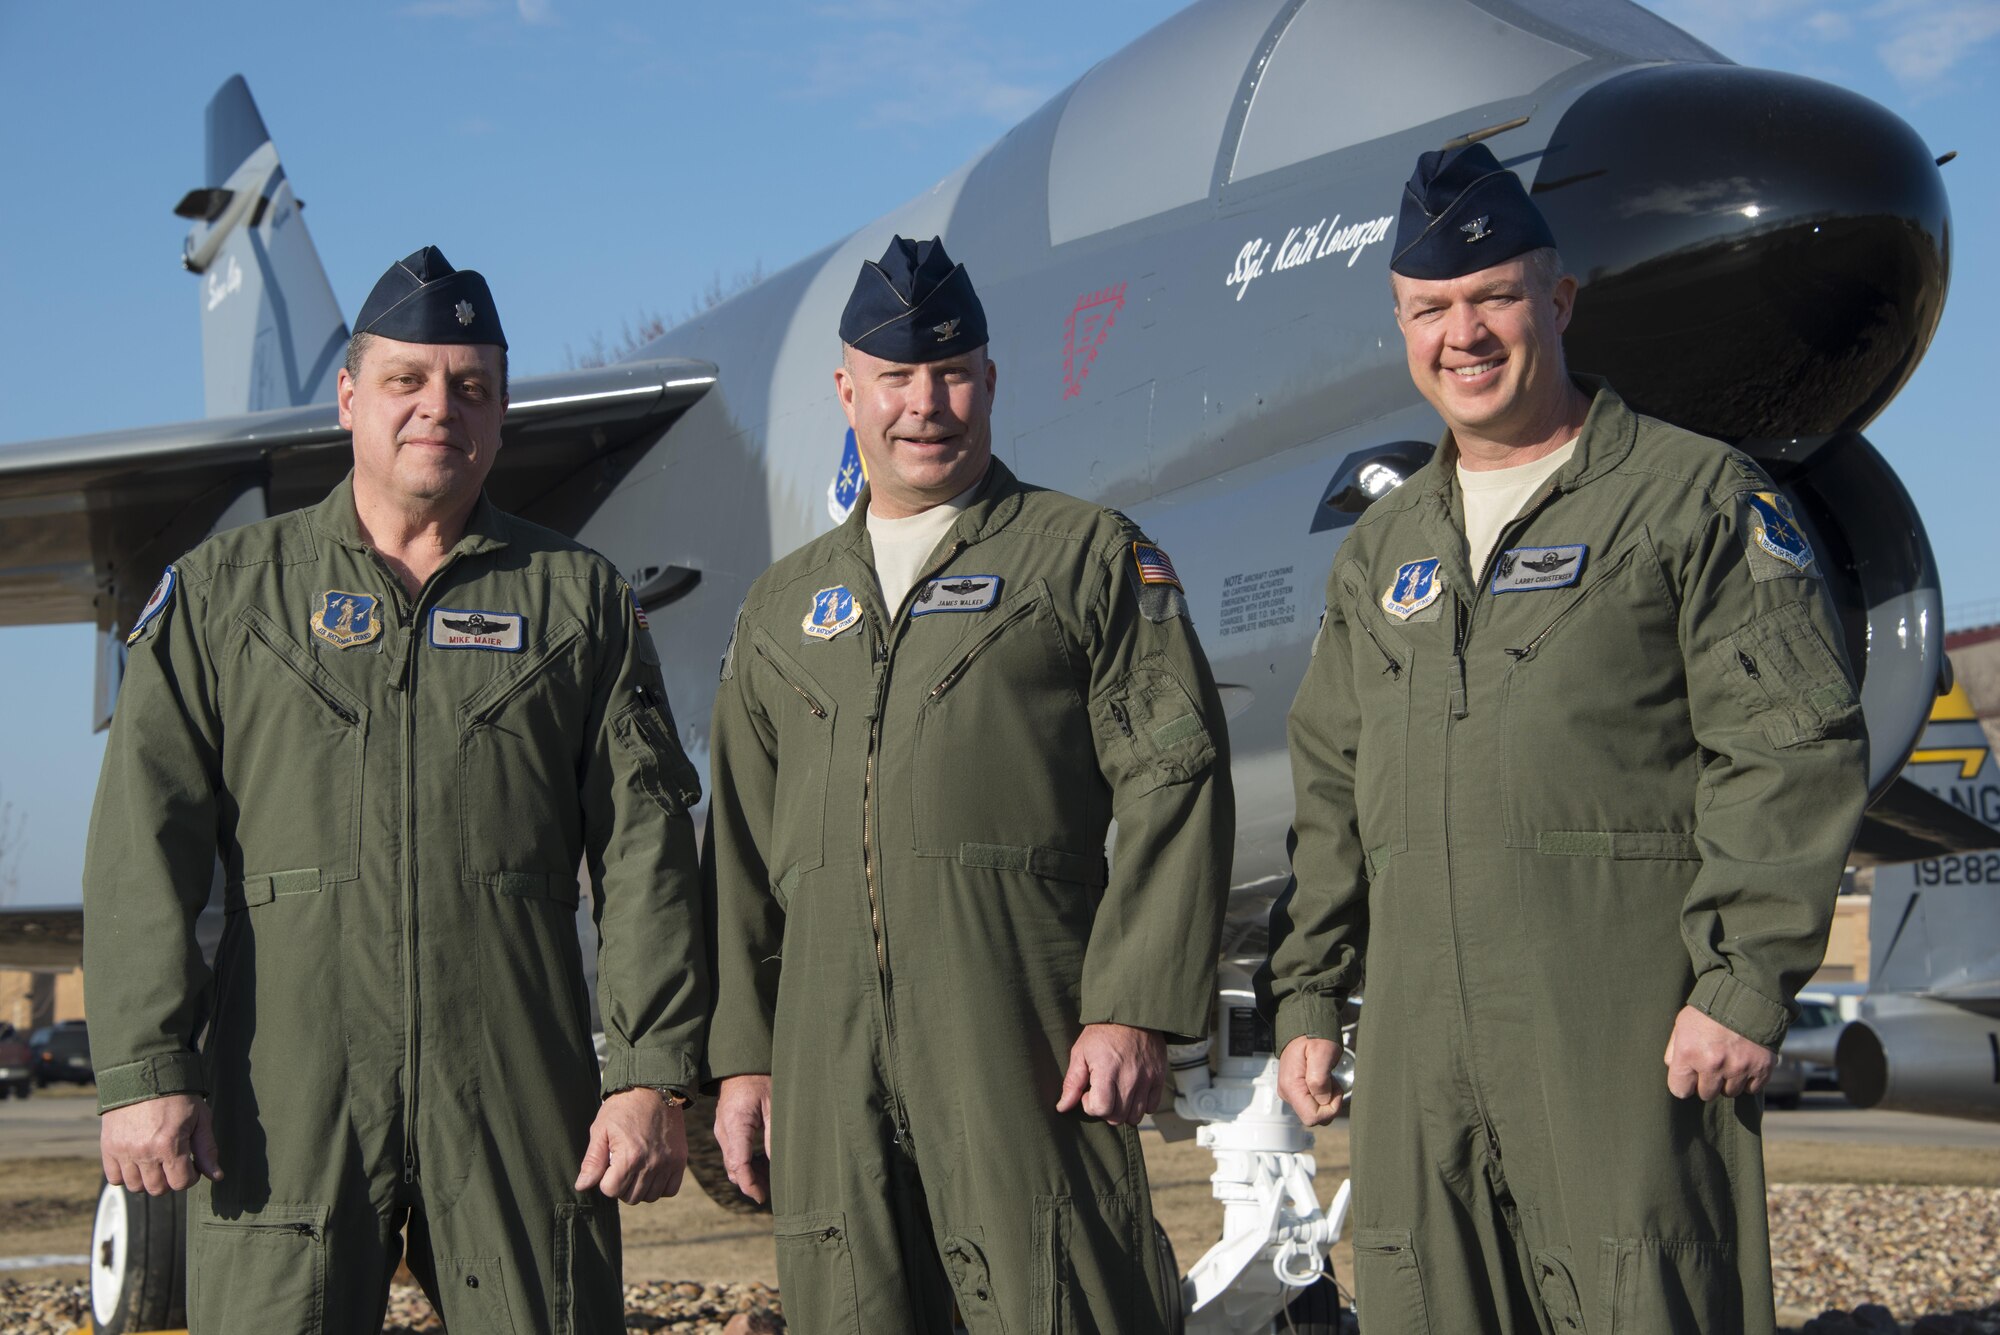 Lt. Col. Mike Maier, Col. Jim Walker and Col. Larry Christensen, pilots with the 185th Air Refueling Wing in Sioux City, Iowa, pose for a photo in front of a freshly painted A-7 D Corsair II that is on static display at the Iowa Air Guard Base on March 17, 2017. The trio are the final three, still actively serving in the 185th Air Refueling Wing who piloted the A-7 when the unit flew the Corsair from March 1977 to March 1992.
U.S. Air National Guard photo by Master Sgt. Vincent De Groot/released